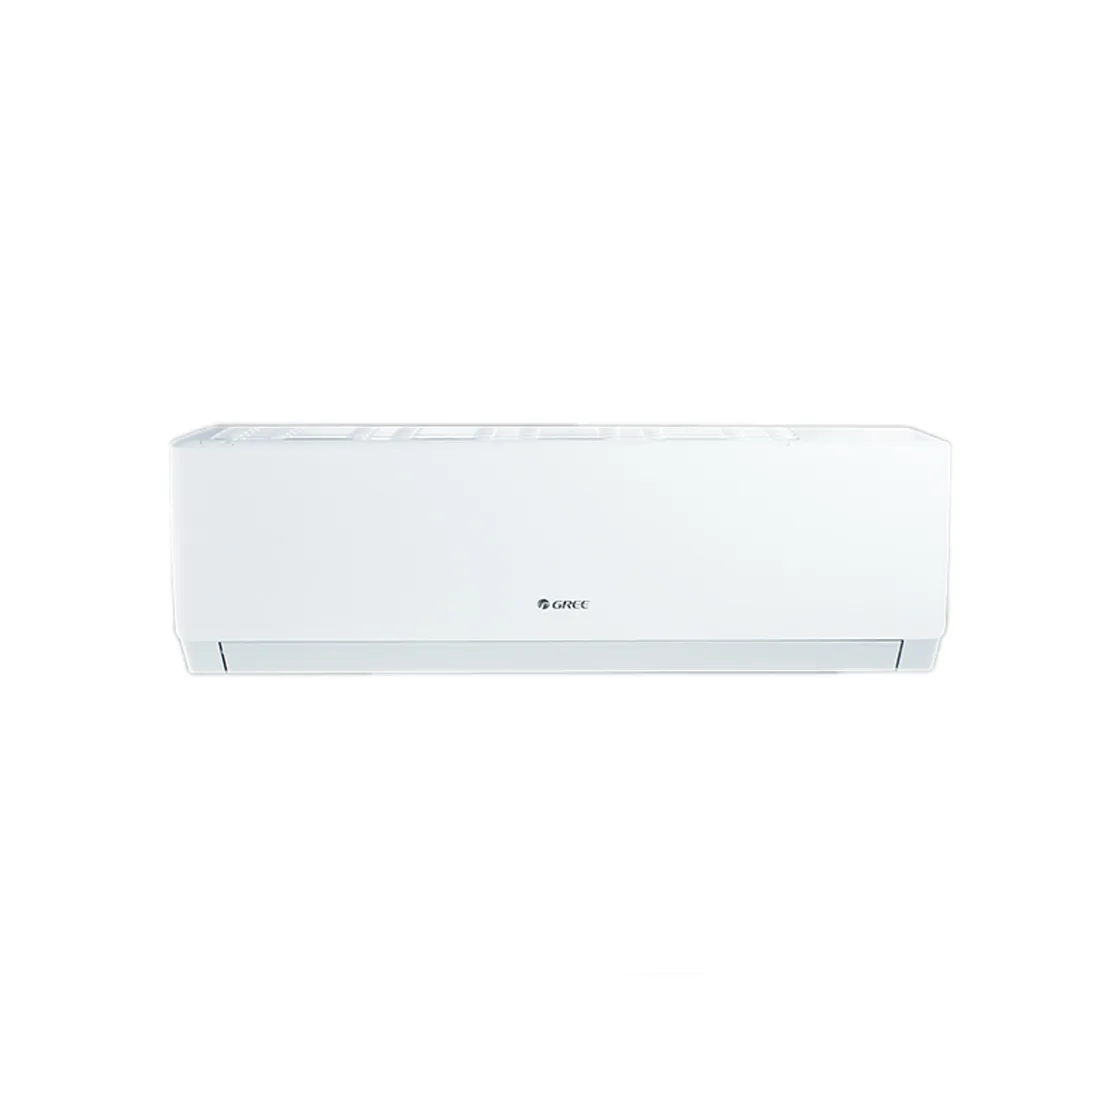 Gree Pular 12PITH11W Air Conditioner